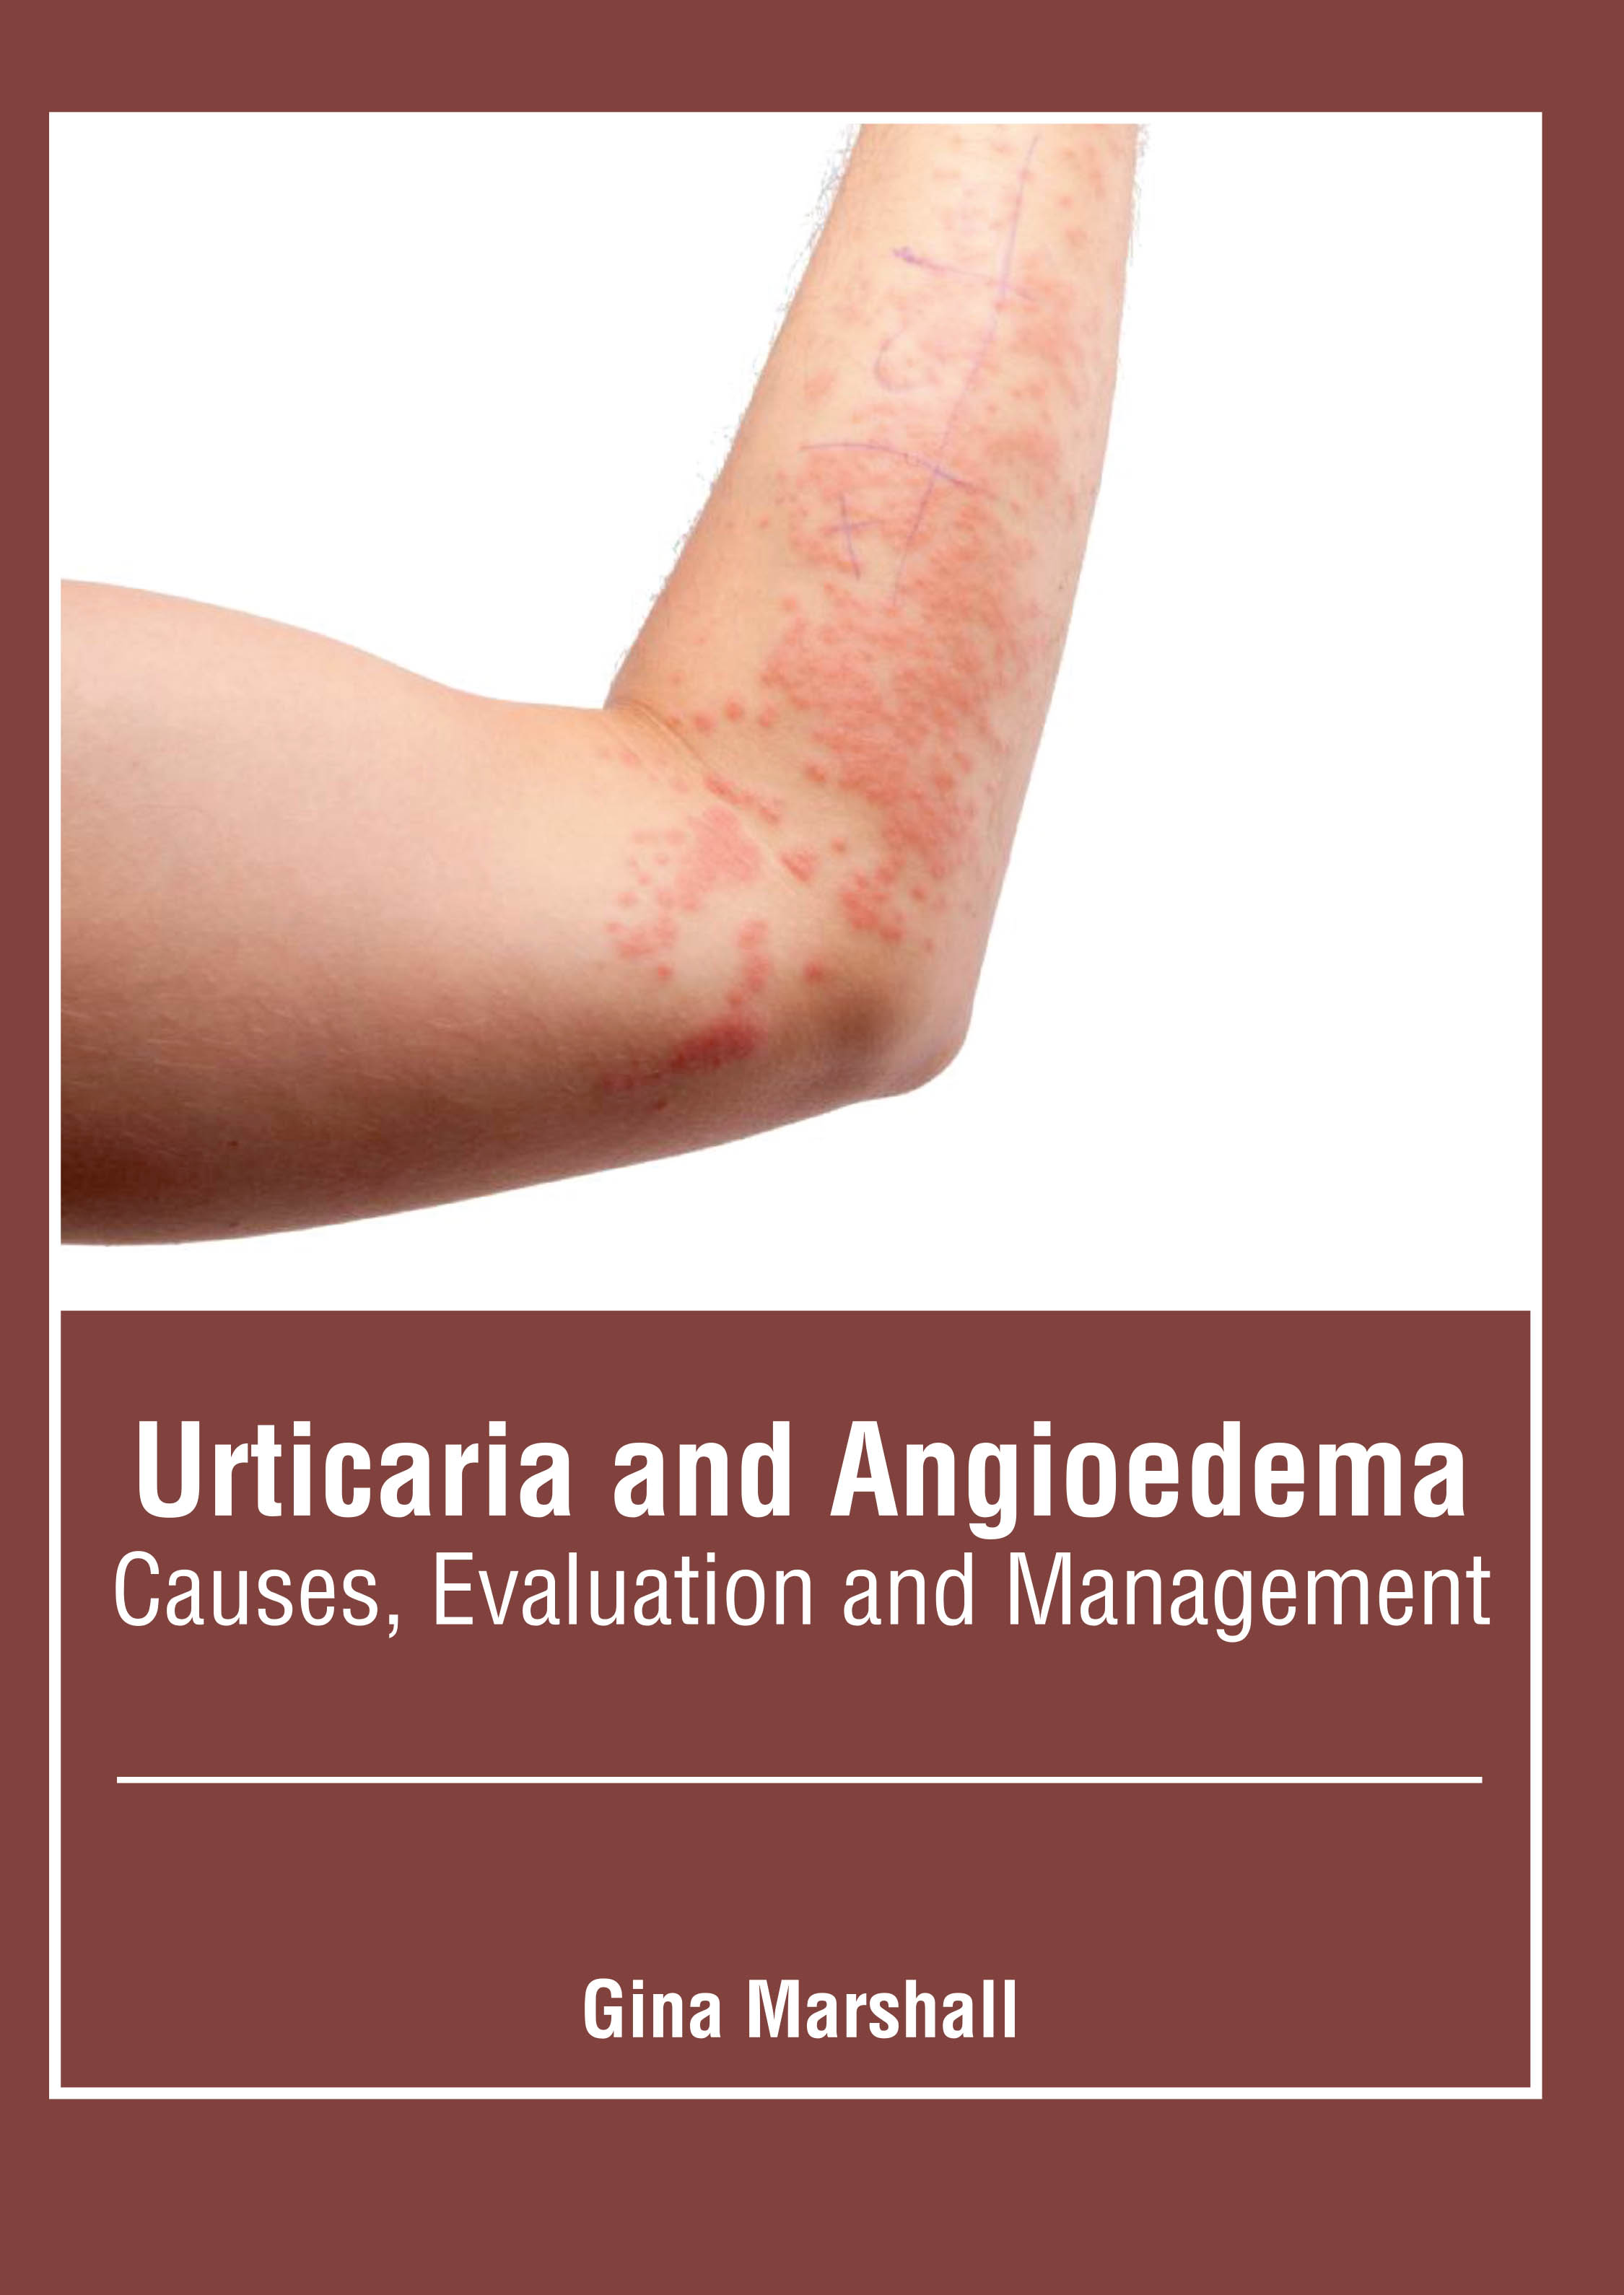 Urticaria and Angioedema: Causes, Evaluation and Management